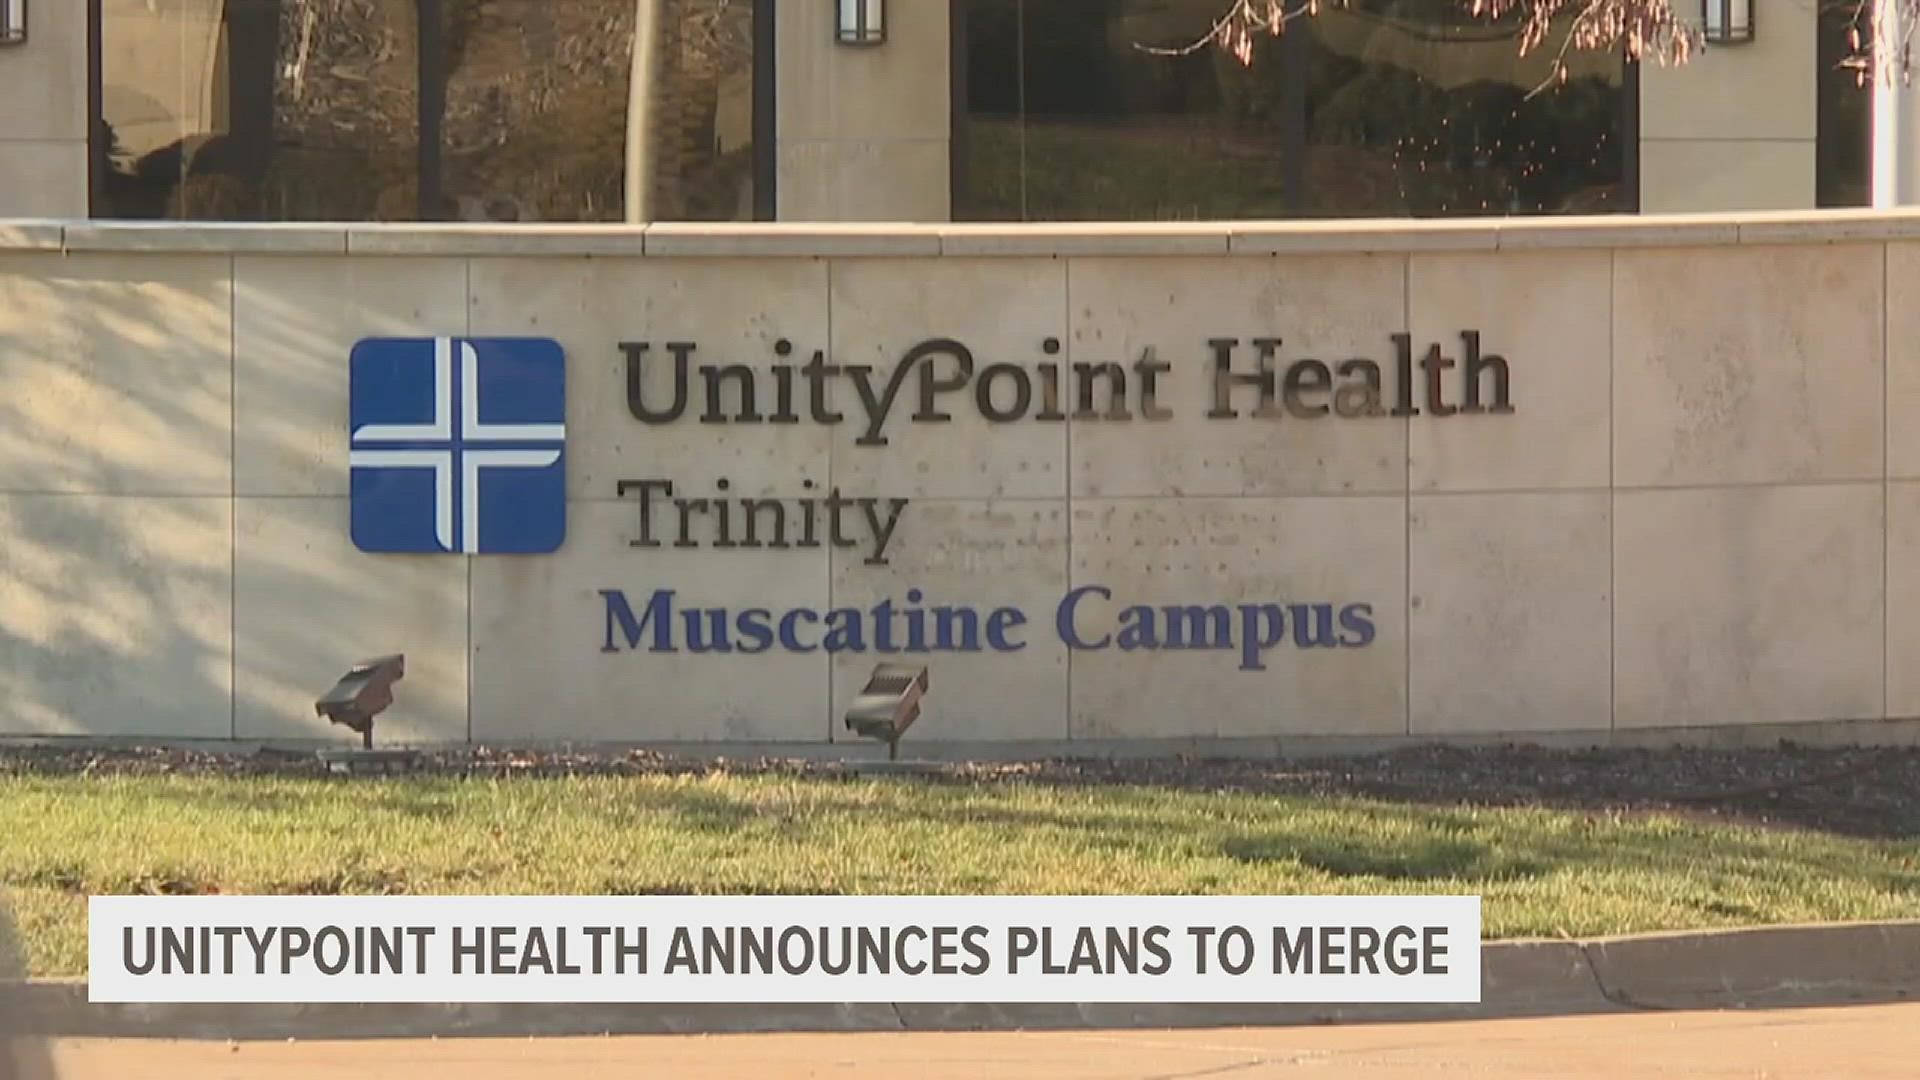 UnityPoint Health is based out of West Des Moines and has five locations across the Quad Cities. Presbyterian Healthcare is headquartered in New Mexico.